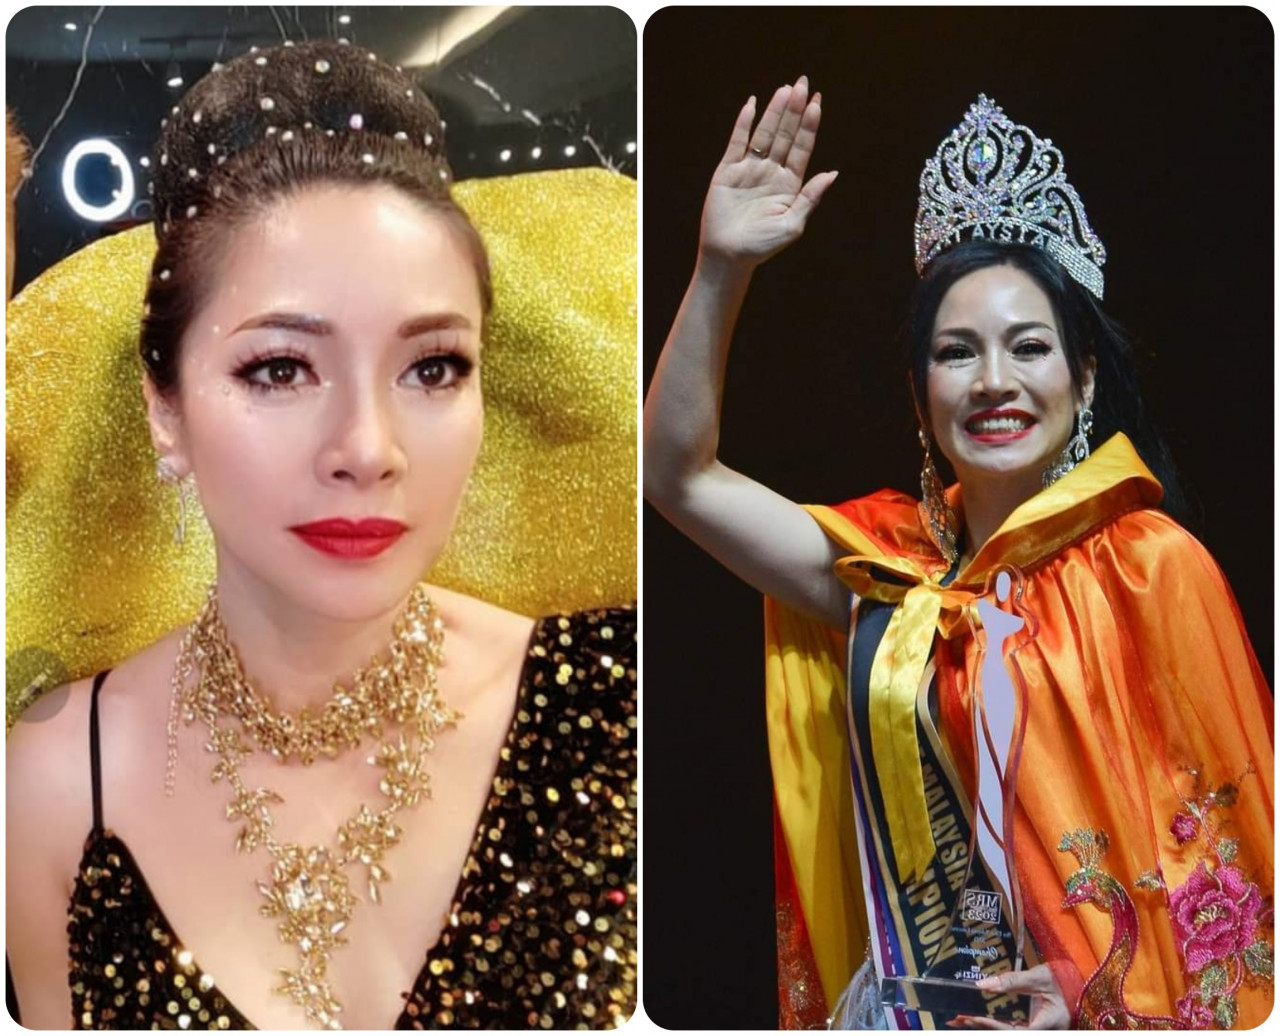 Mrs Malaysia Elite winner Maria Tay says older women have more time for pageants because their children have grown up. – Pic courtesy of Foong Chee